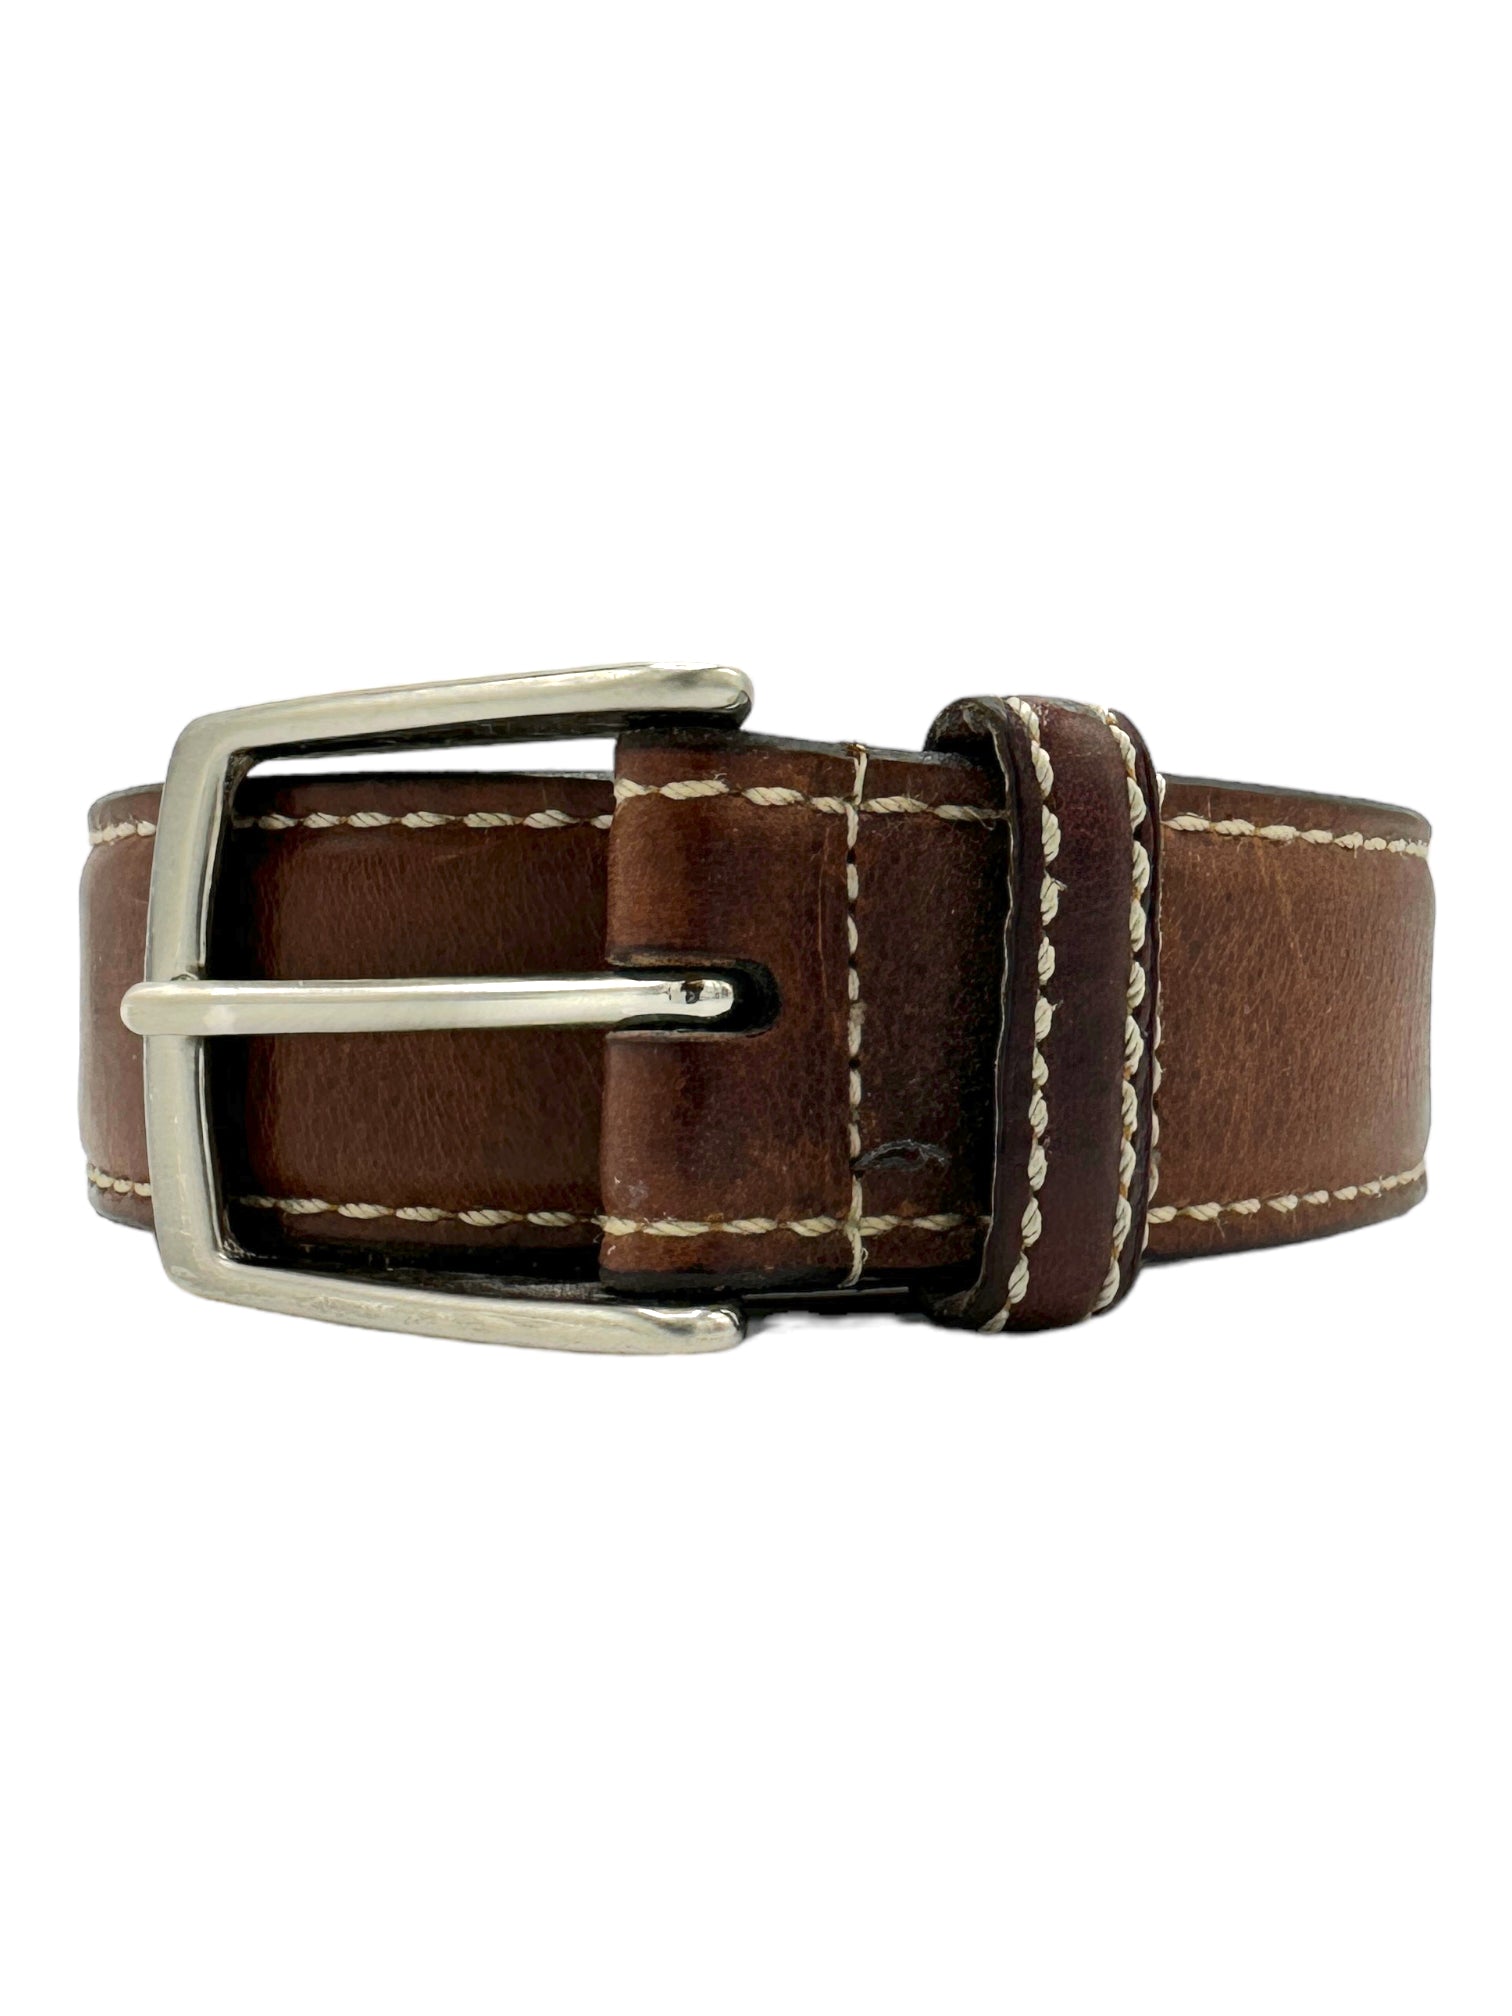 Allen Edmonds Light Brown Leather Belt - Genuine Design luxury consignment Calgary, Alberta, Canada New and pre-owned clothing, shoes, accessories.